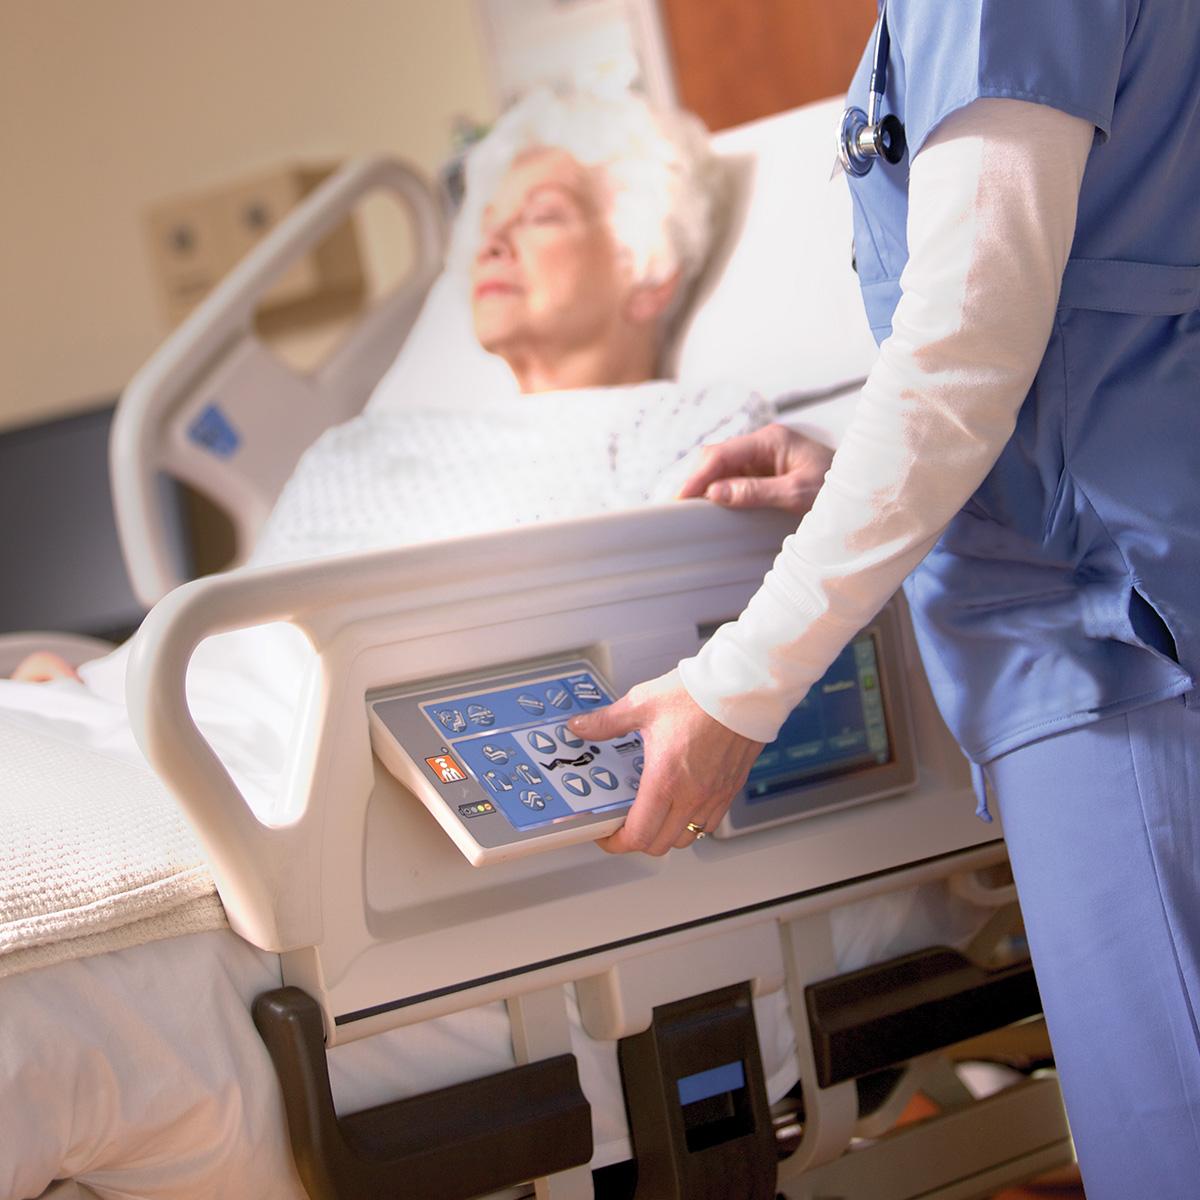 A patient lies in a Progressa bed while her clinician uses the bed controls.